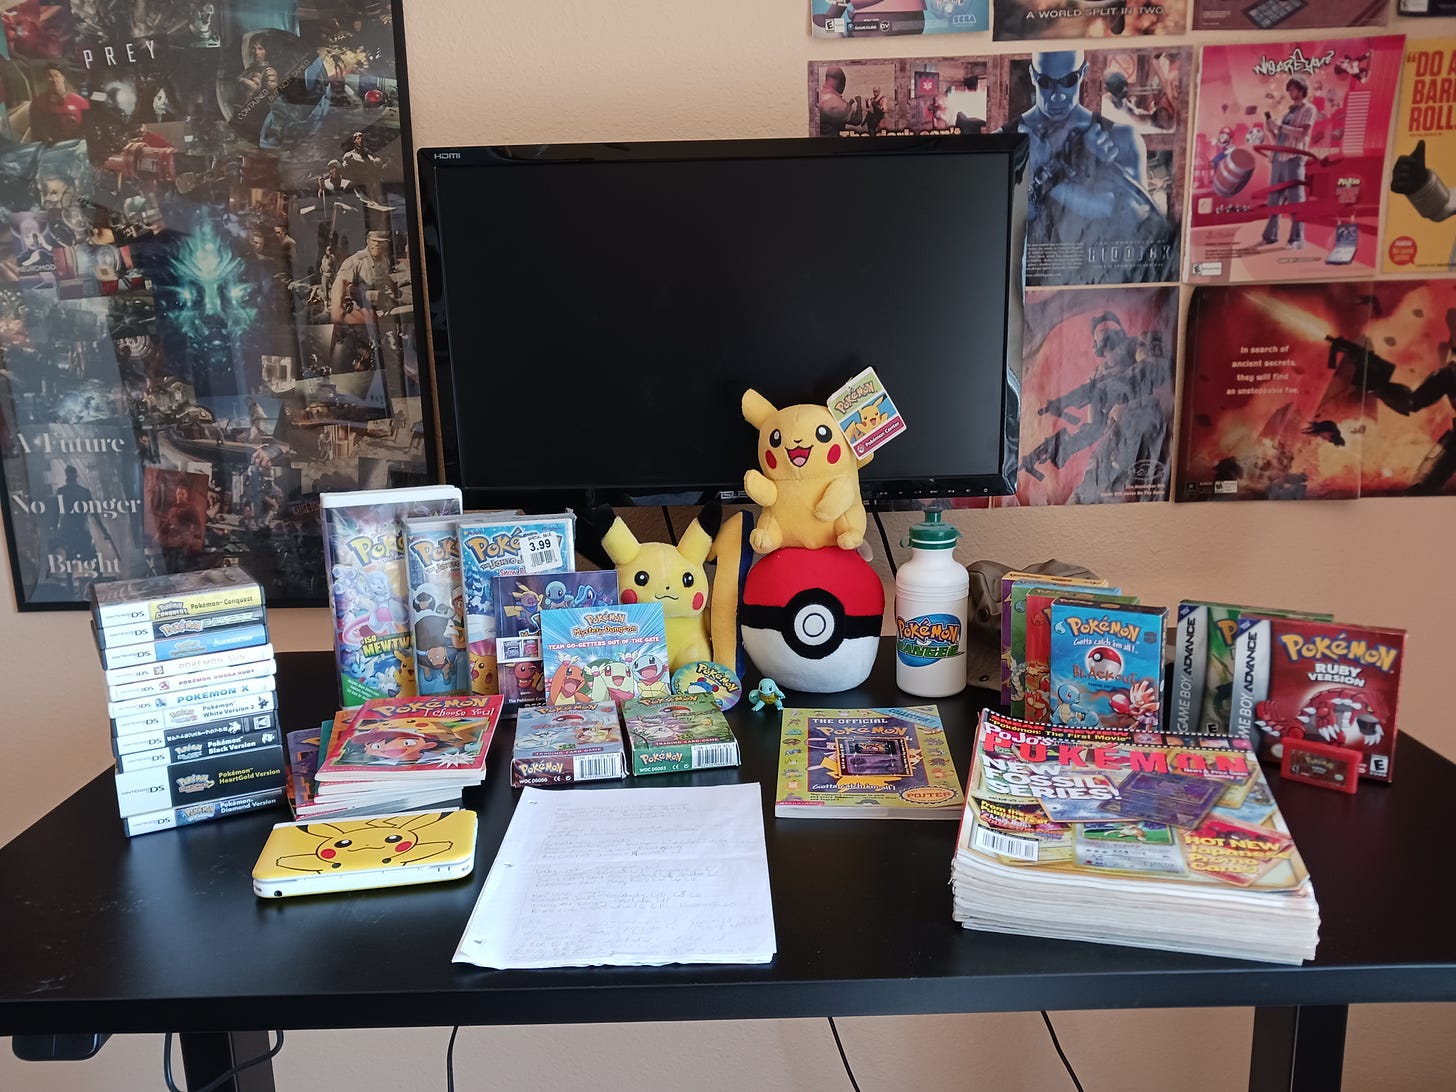 Ryan still has a ton of awesome Pokémon items from his childhood! Pictured here are video games, VHS videos, books, TCG deck boxes, Pikachu plush toys, a Pokémon Ranger water bottle, magazines, a Pikachu 3DS console, and a hand-written note by Ryan from his days playing Pokémon Ruby.